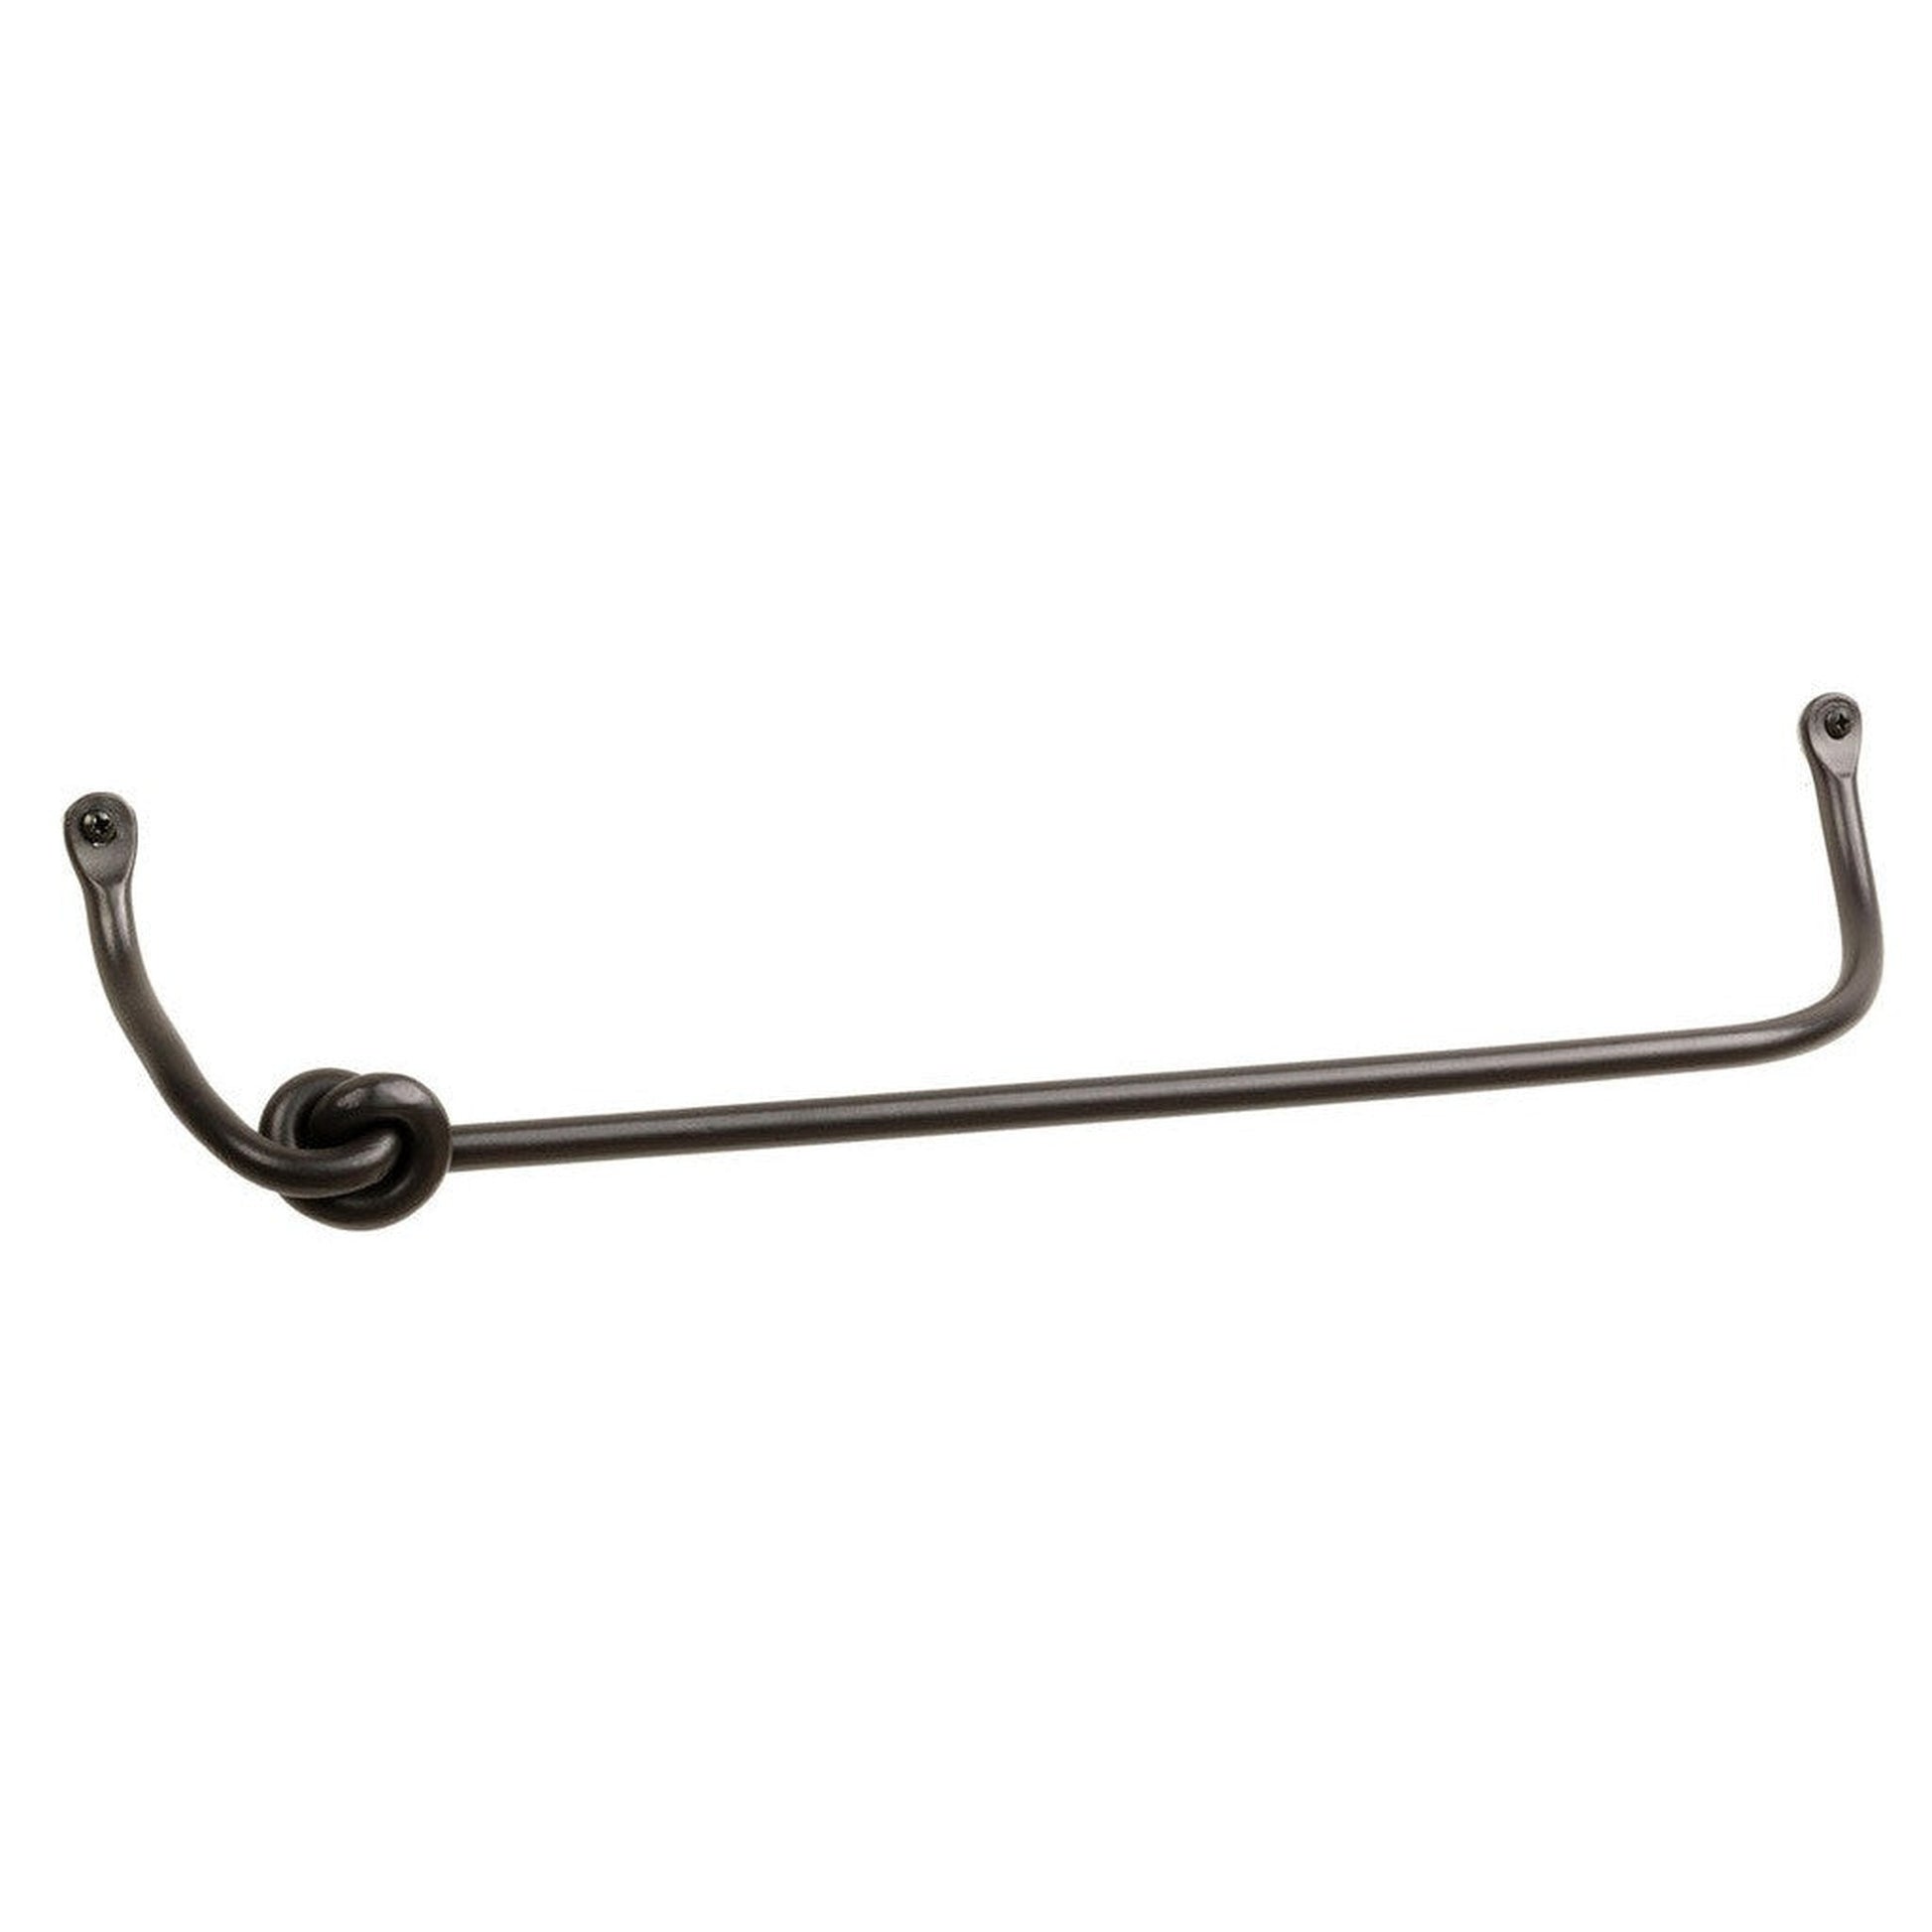 Stone County Ironworks Knot 32" Burnished Gold Iron Towel Bar With Copper Iron Accent